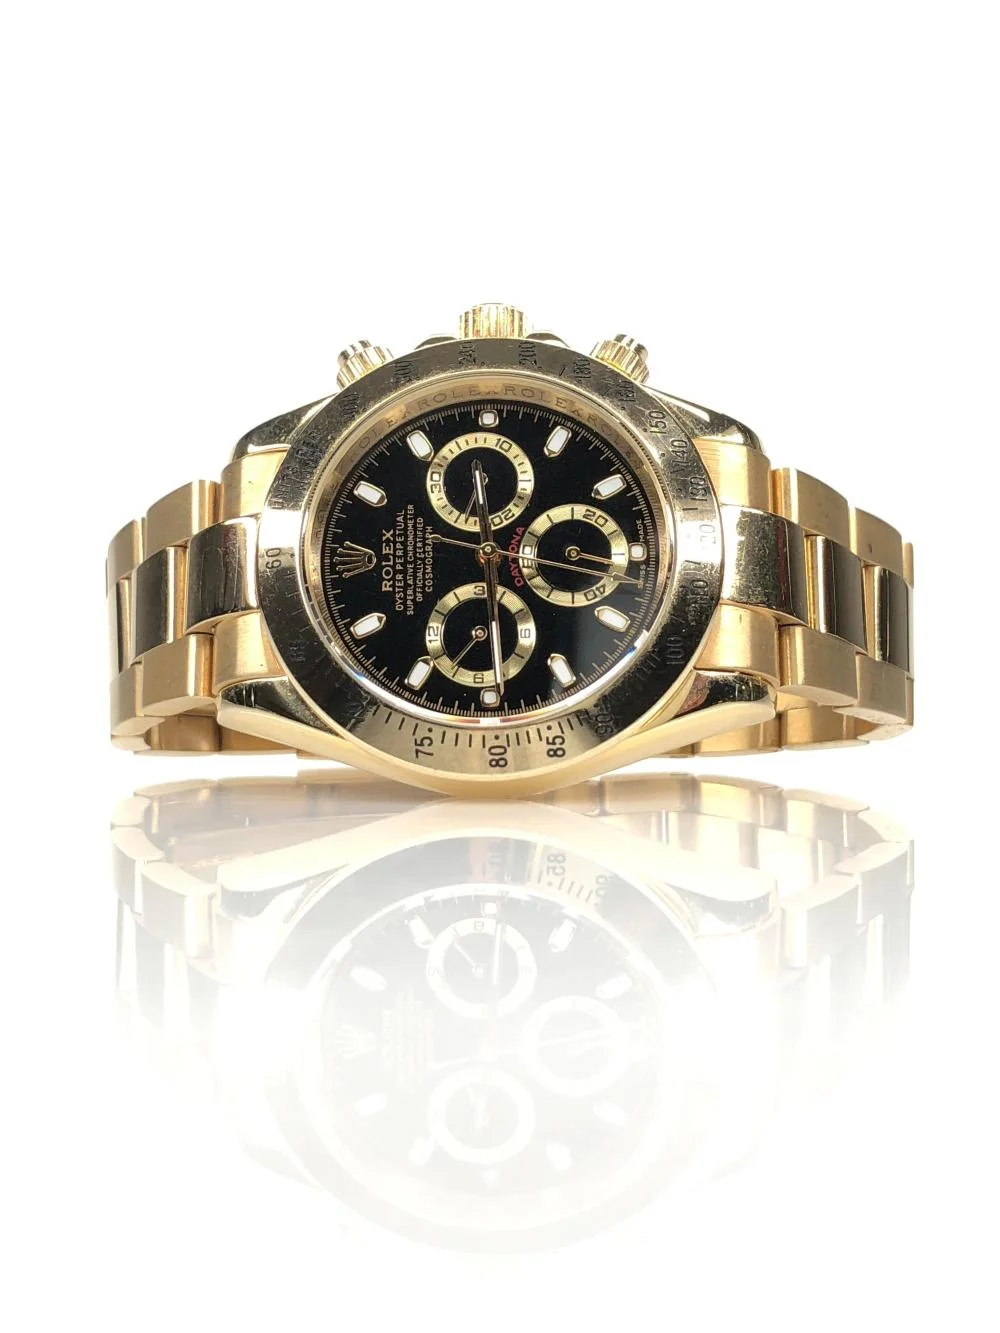 Lot - Molly's Game Movie Prop Rolex Replica Watch